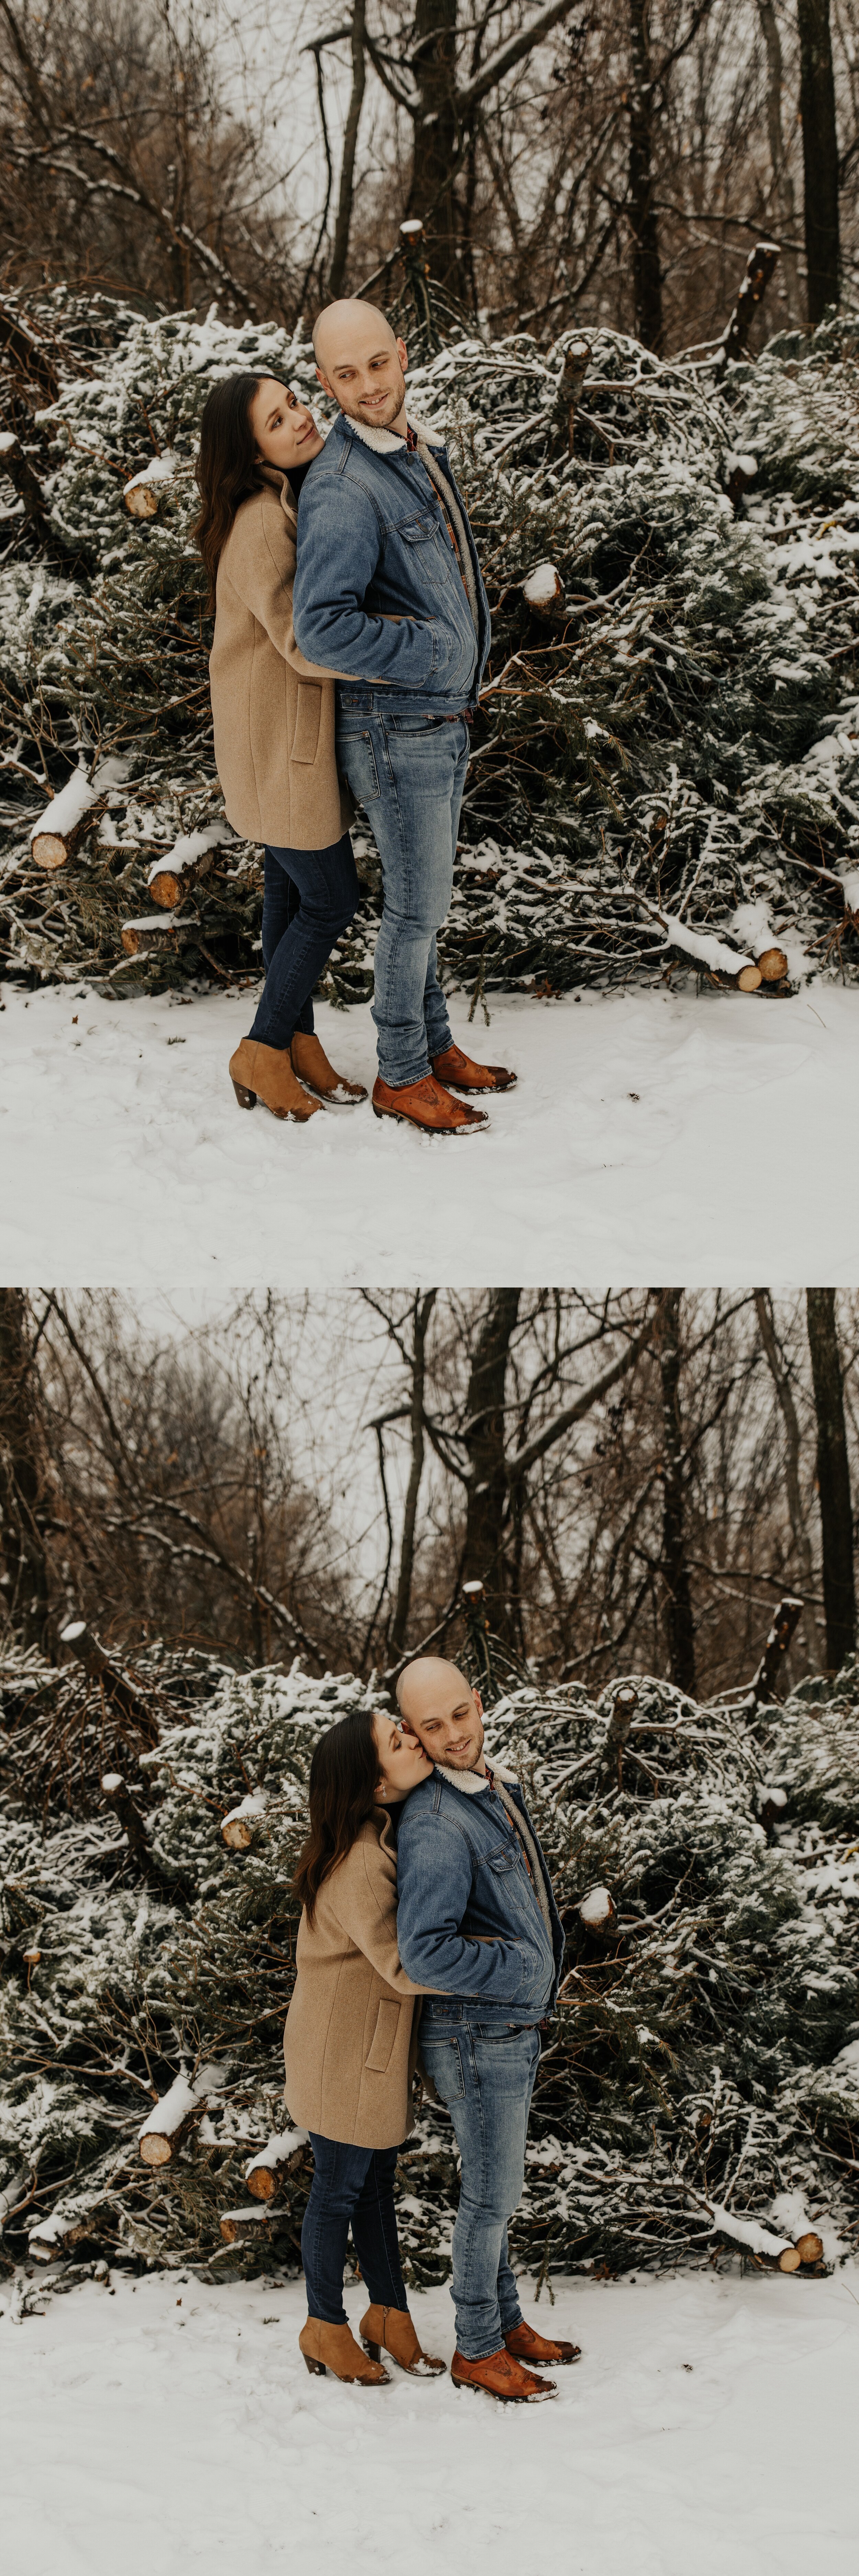 jessika-christine-photography-outdoor-engagement-couples-snow-adventurous-session (7).jpg